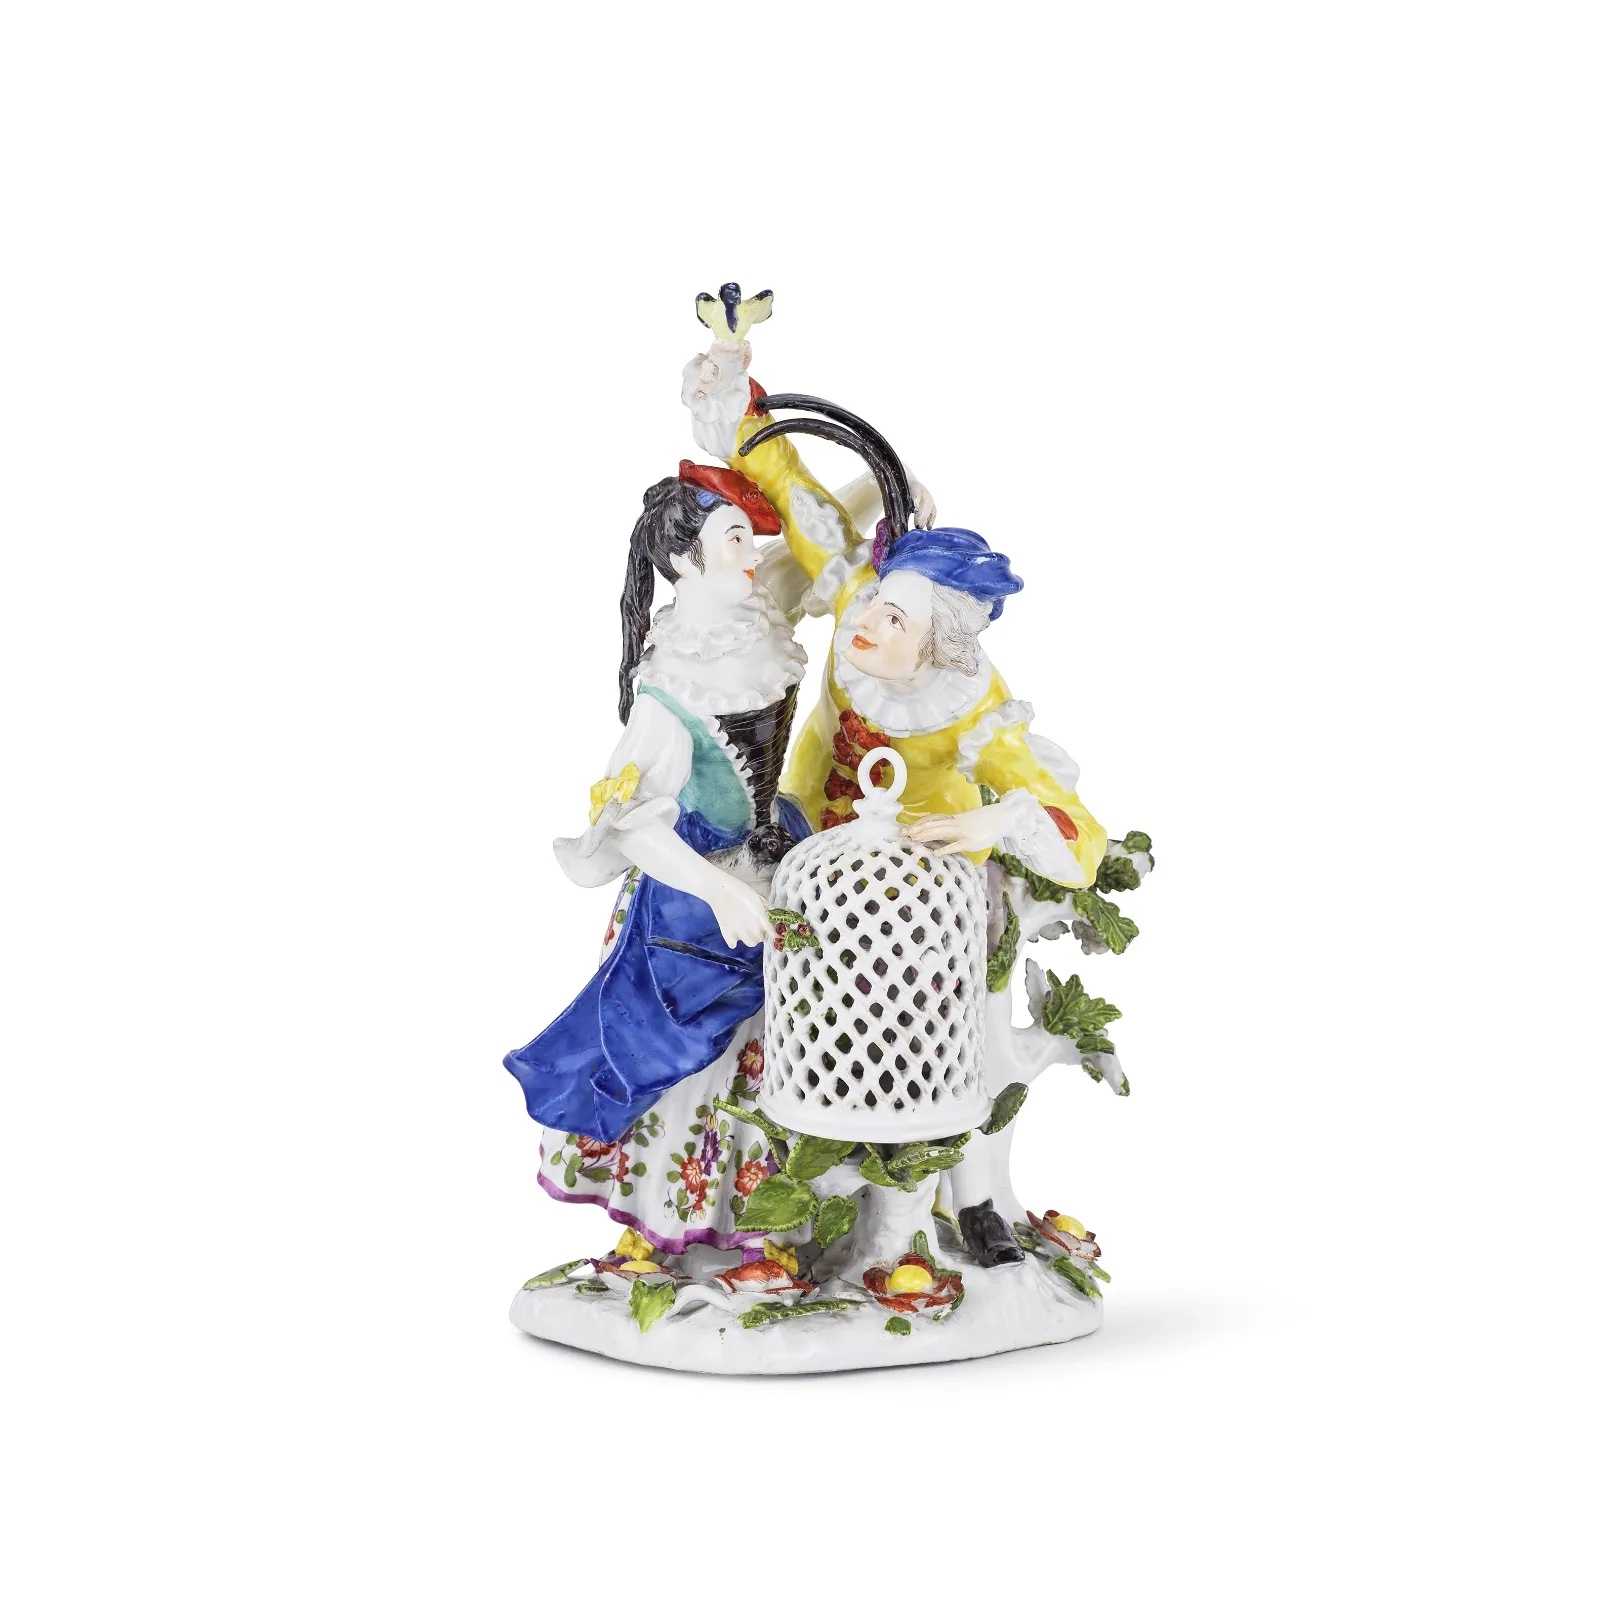 Circa-1745 Meissen group of lovers with a birdcage by Kaendler, which sold for €171,450 ($183,470) with buyer’s premium at Bonhams Paris.